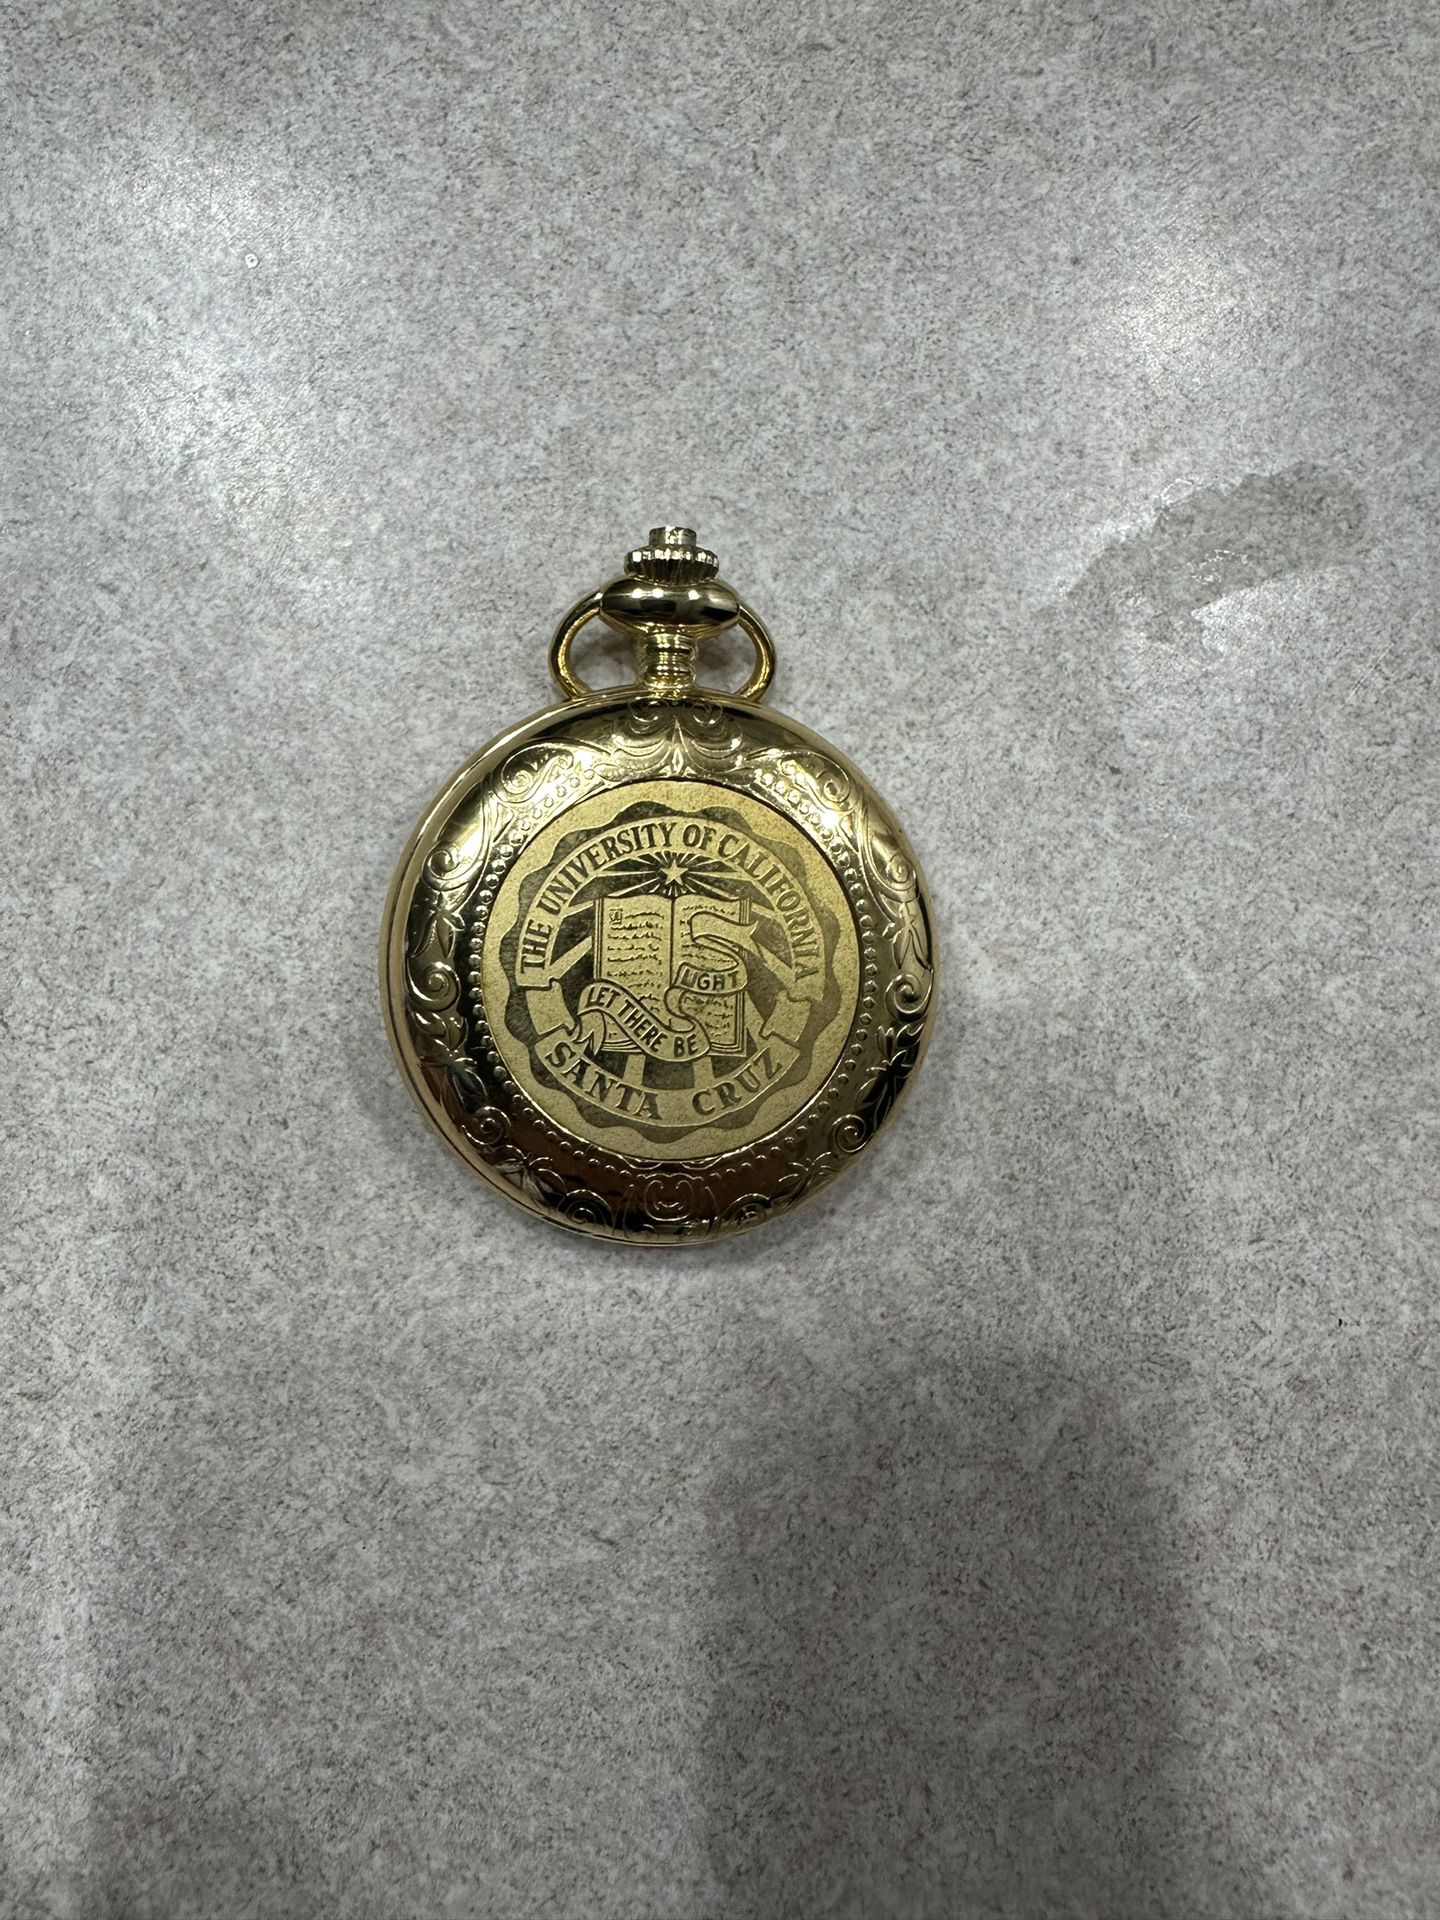 Gold Plated Pocket Watch